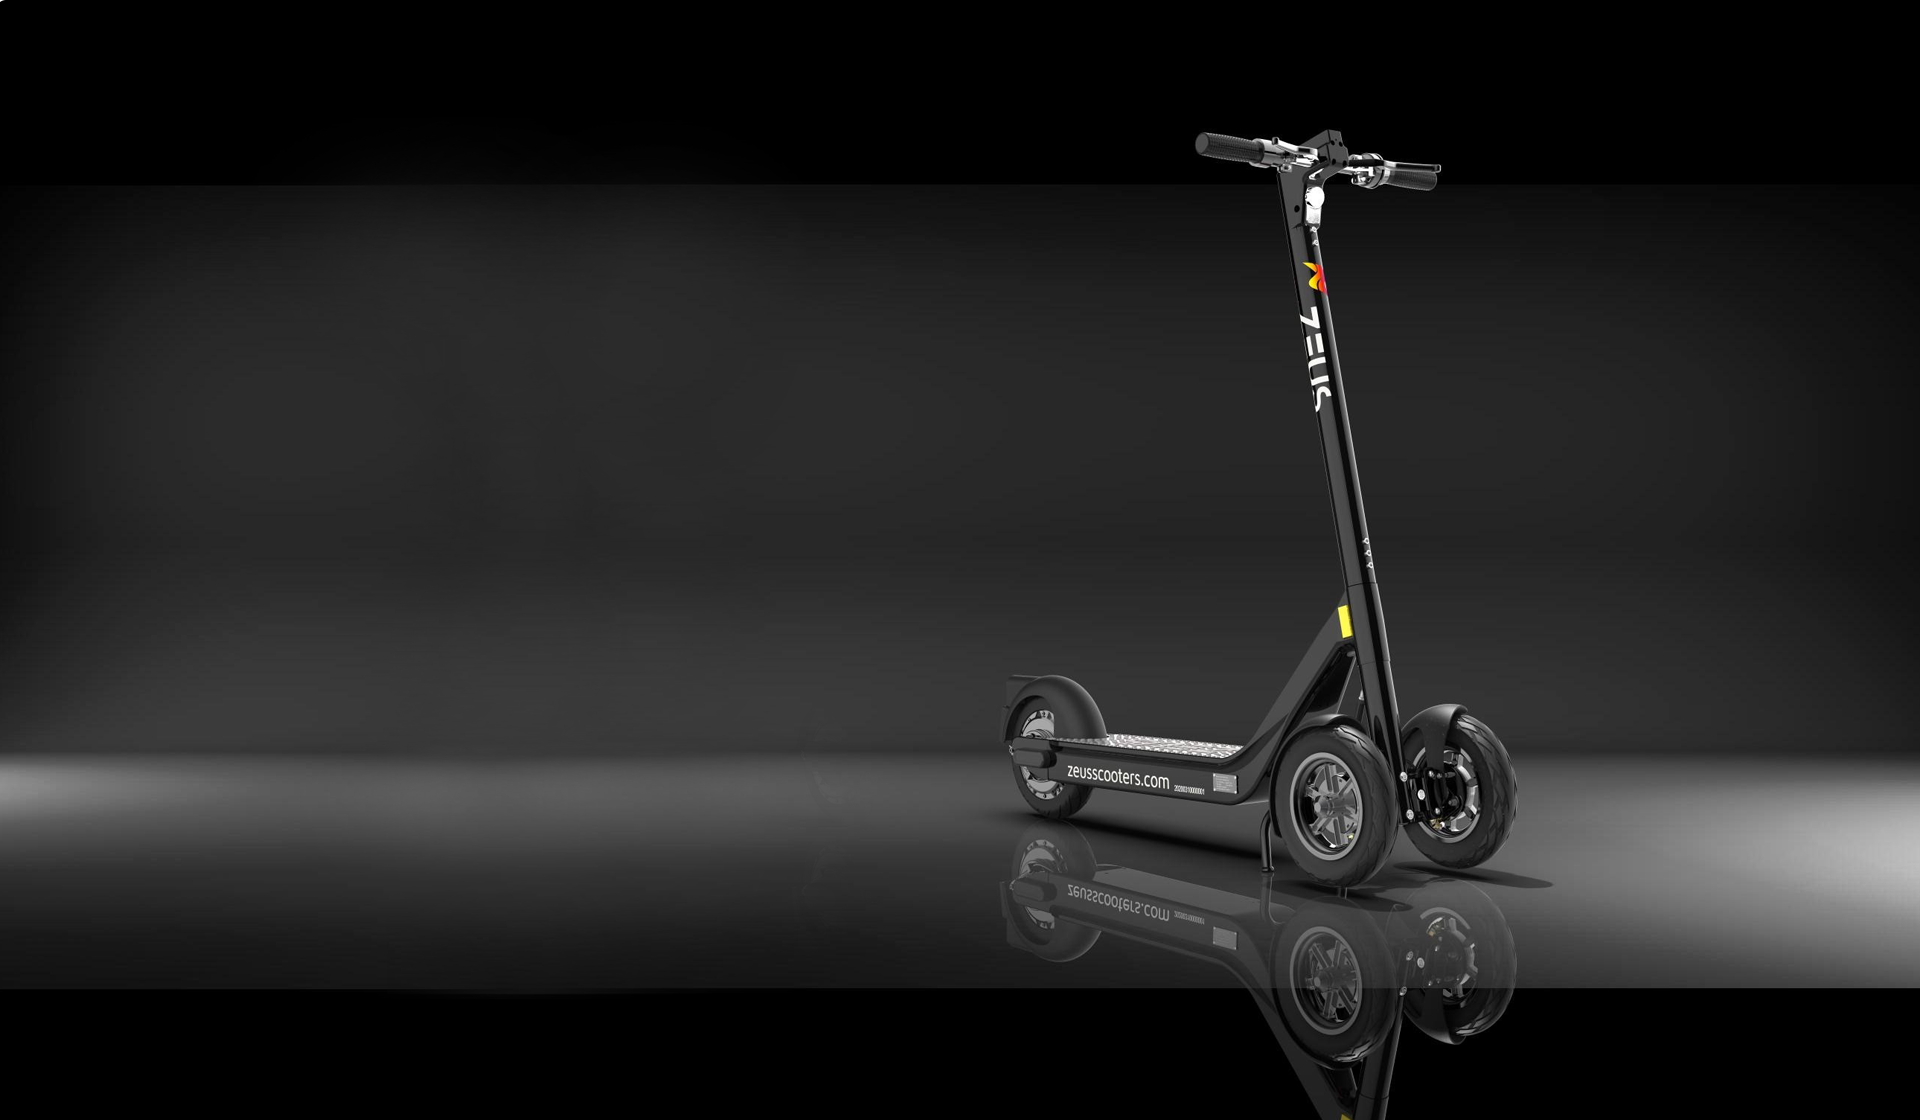 Zeus has introduced its latest e-scooter model, the Z2, to Regensburg. Photo: Zeus Scooters